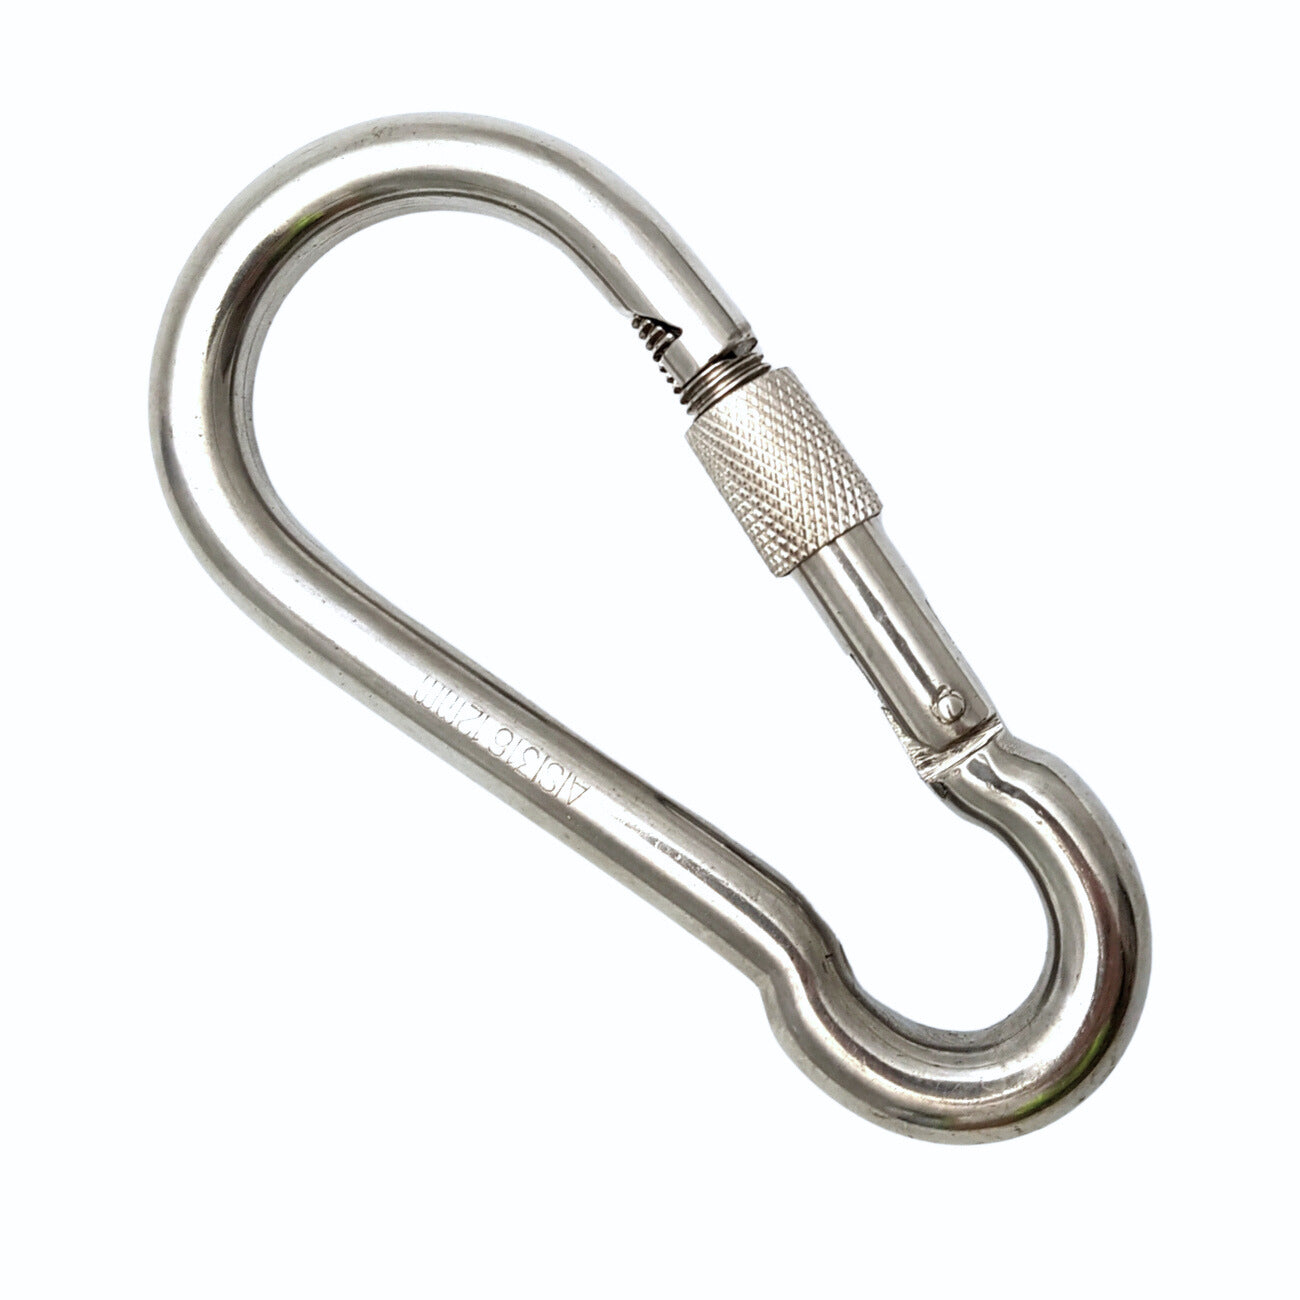 Stainless steel snap hooks with locking screw gate (carabiner). Australia wide shipping. Shop chain.com.au